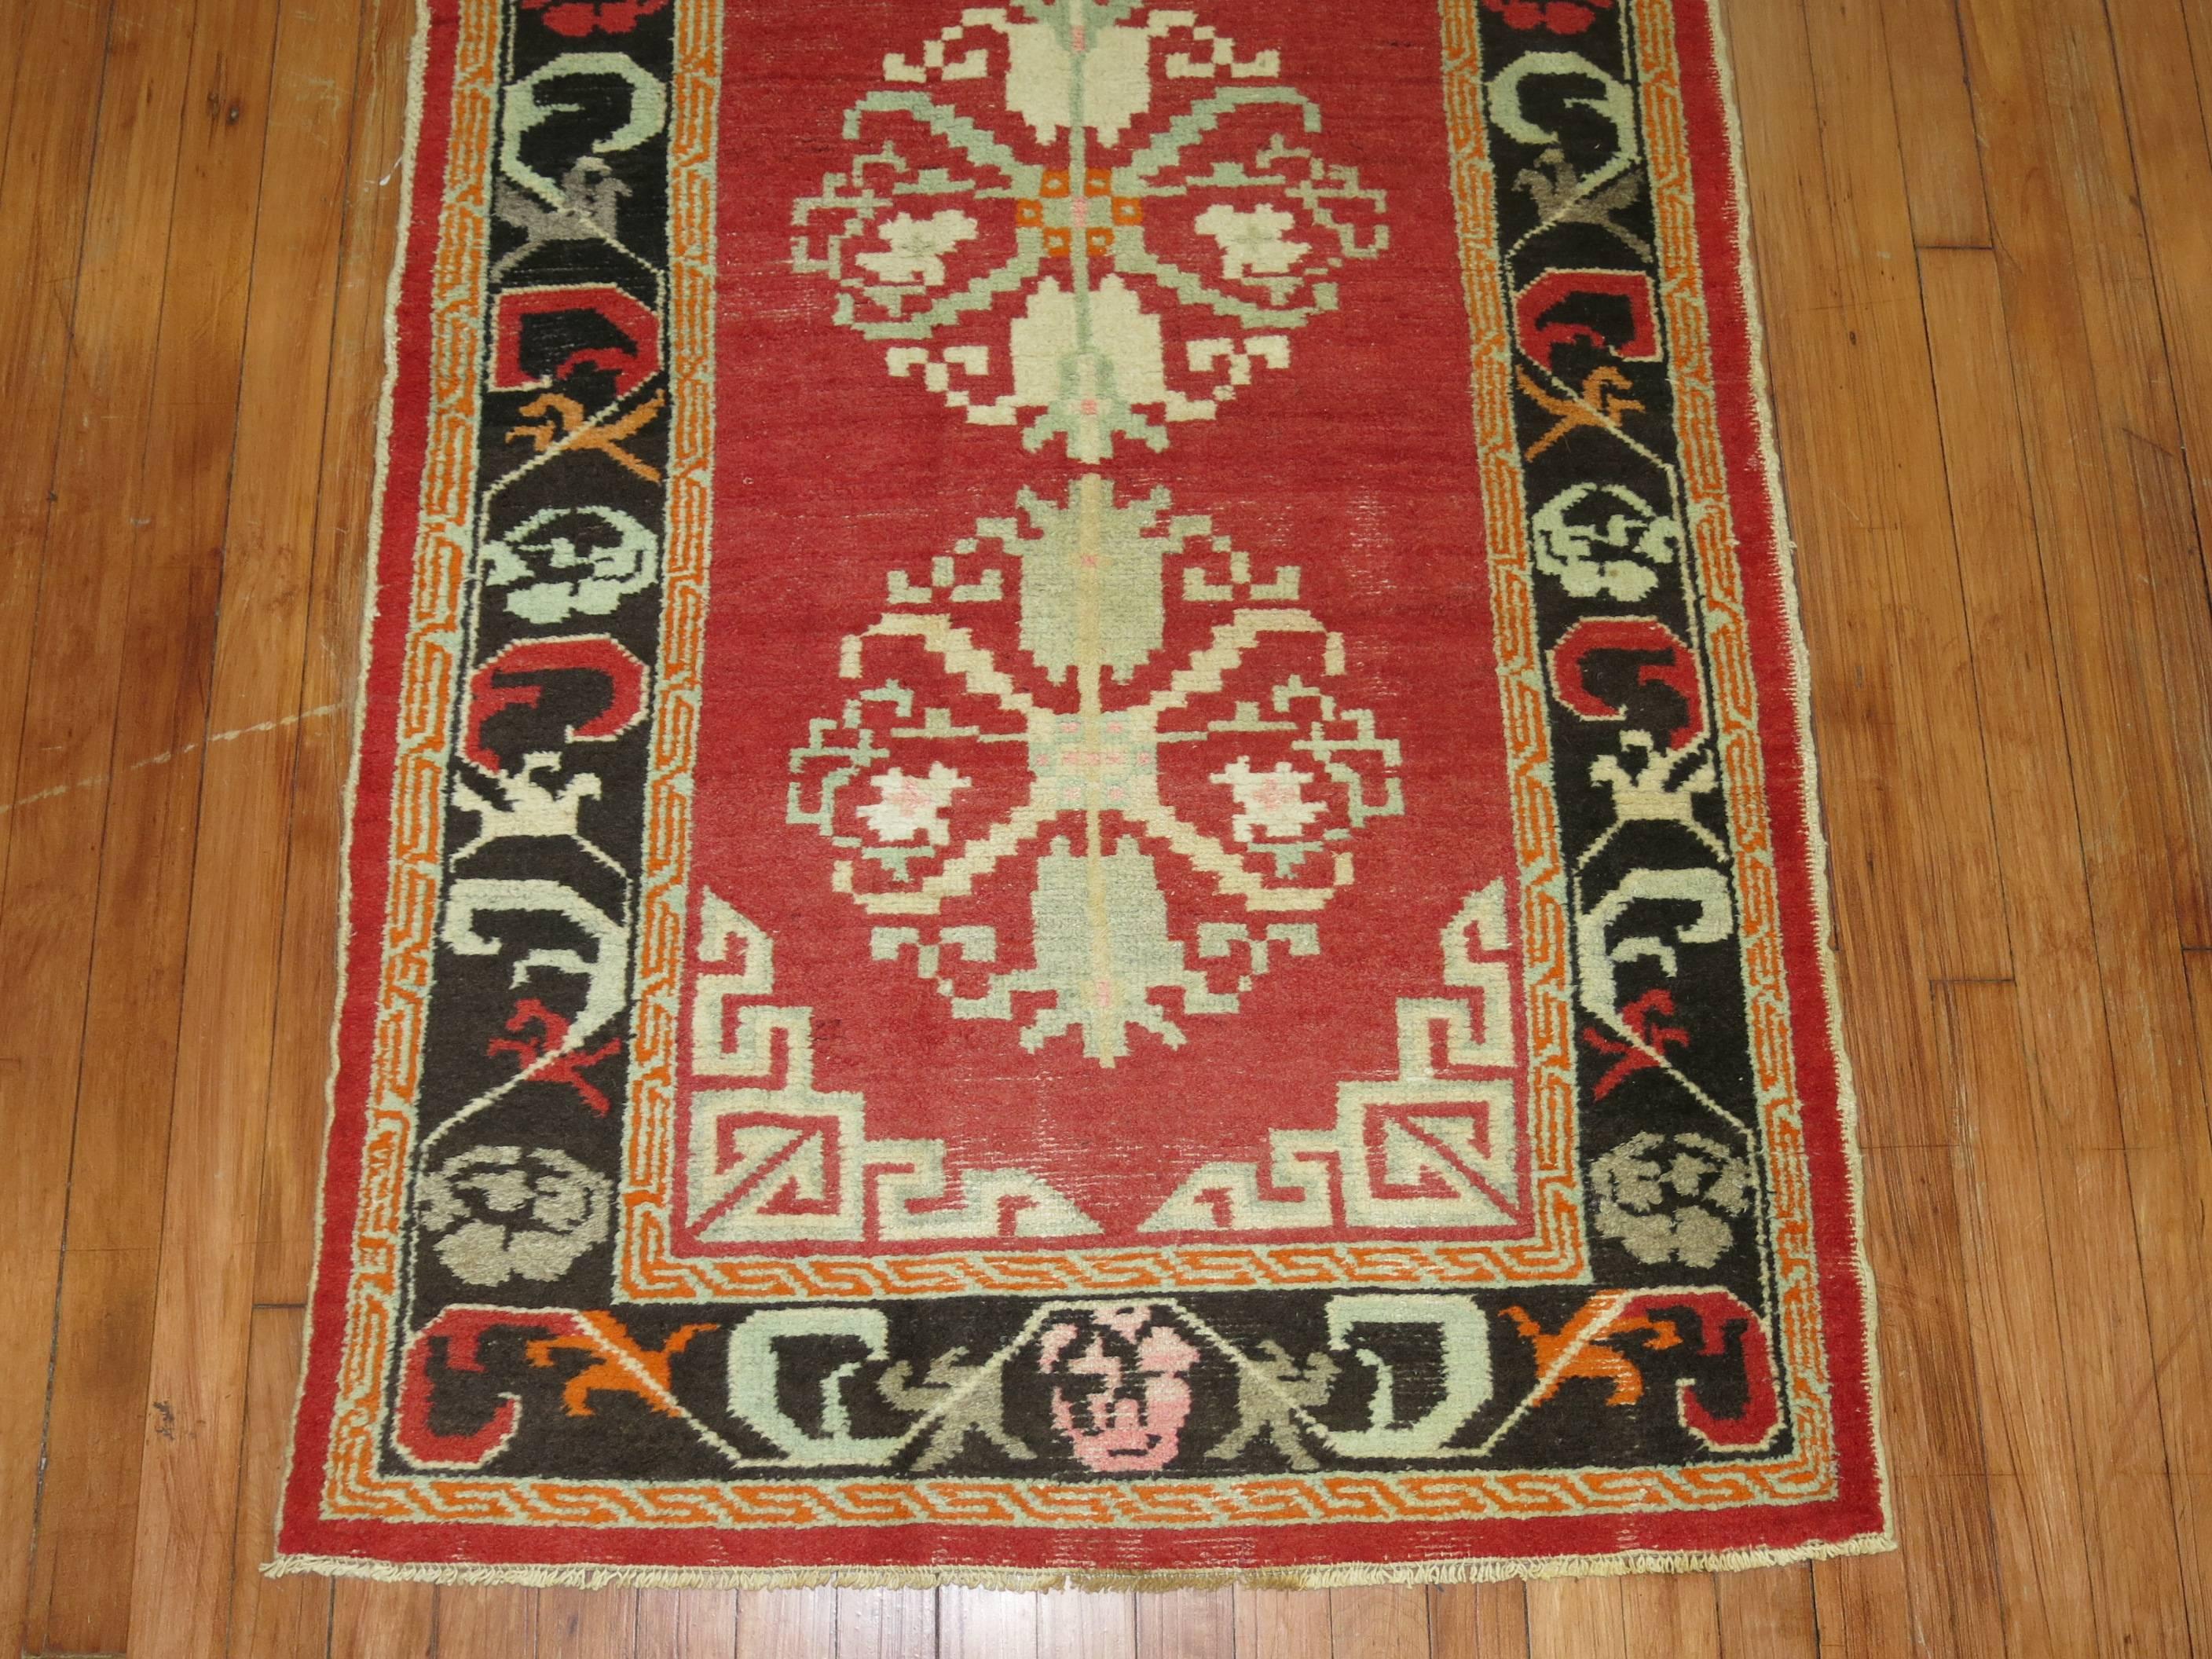 Vintage Turkish Rug influenced by Mongolian Style Rugs In Excellent Condition For Sale In New York, NY